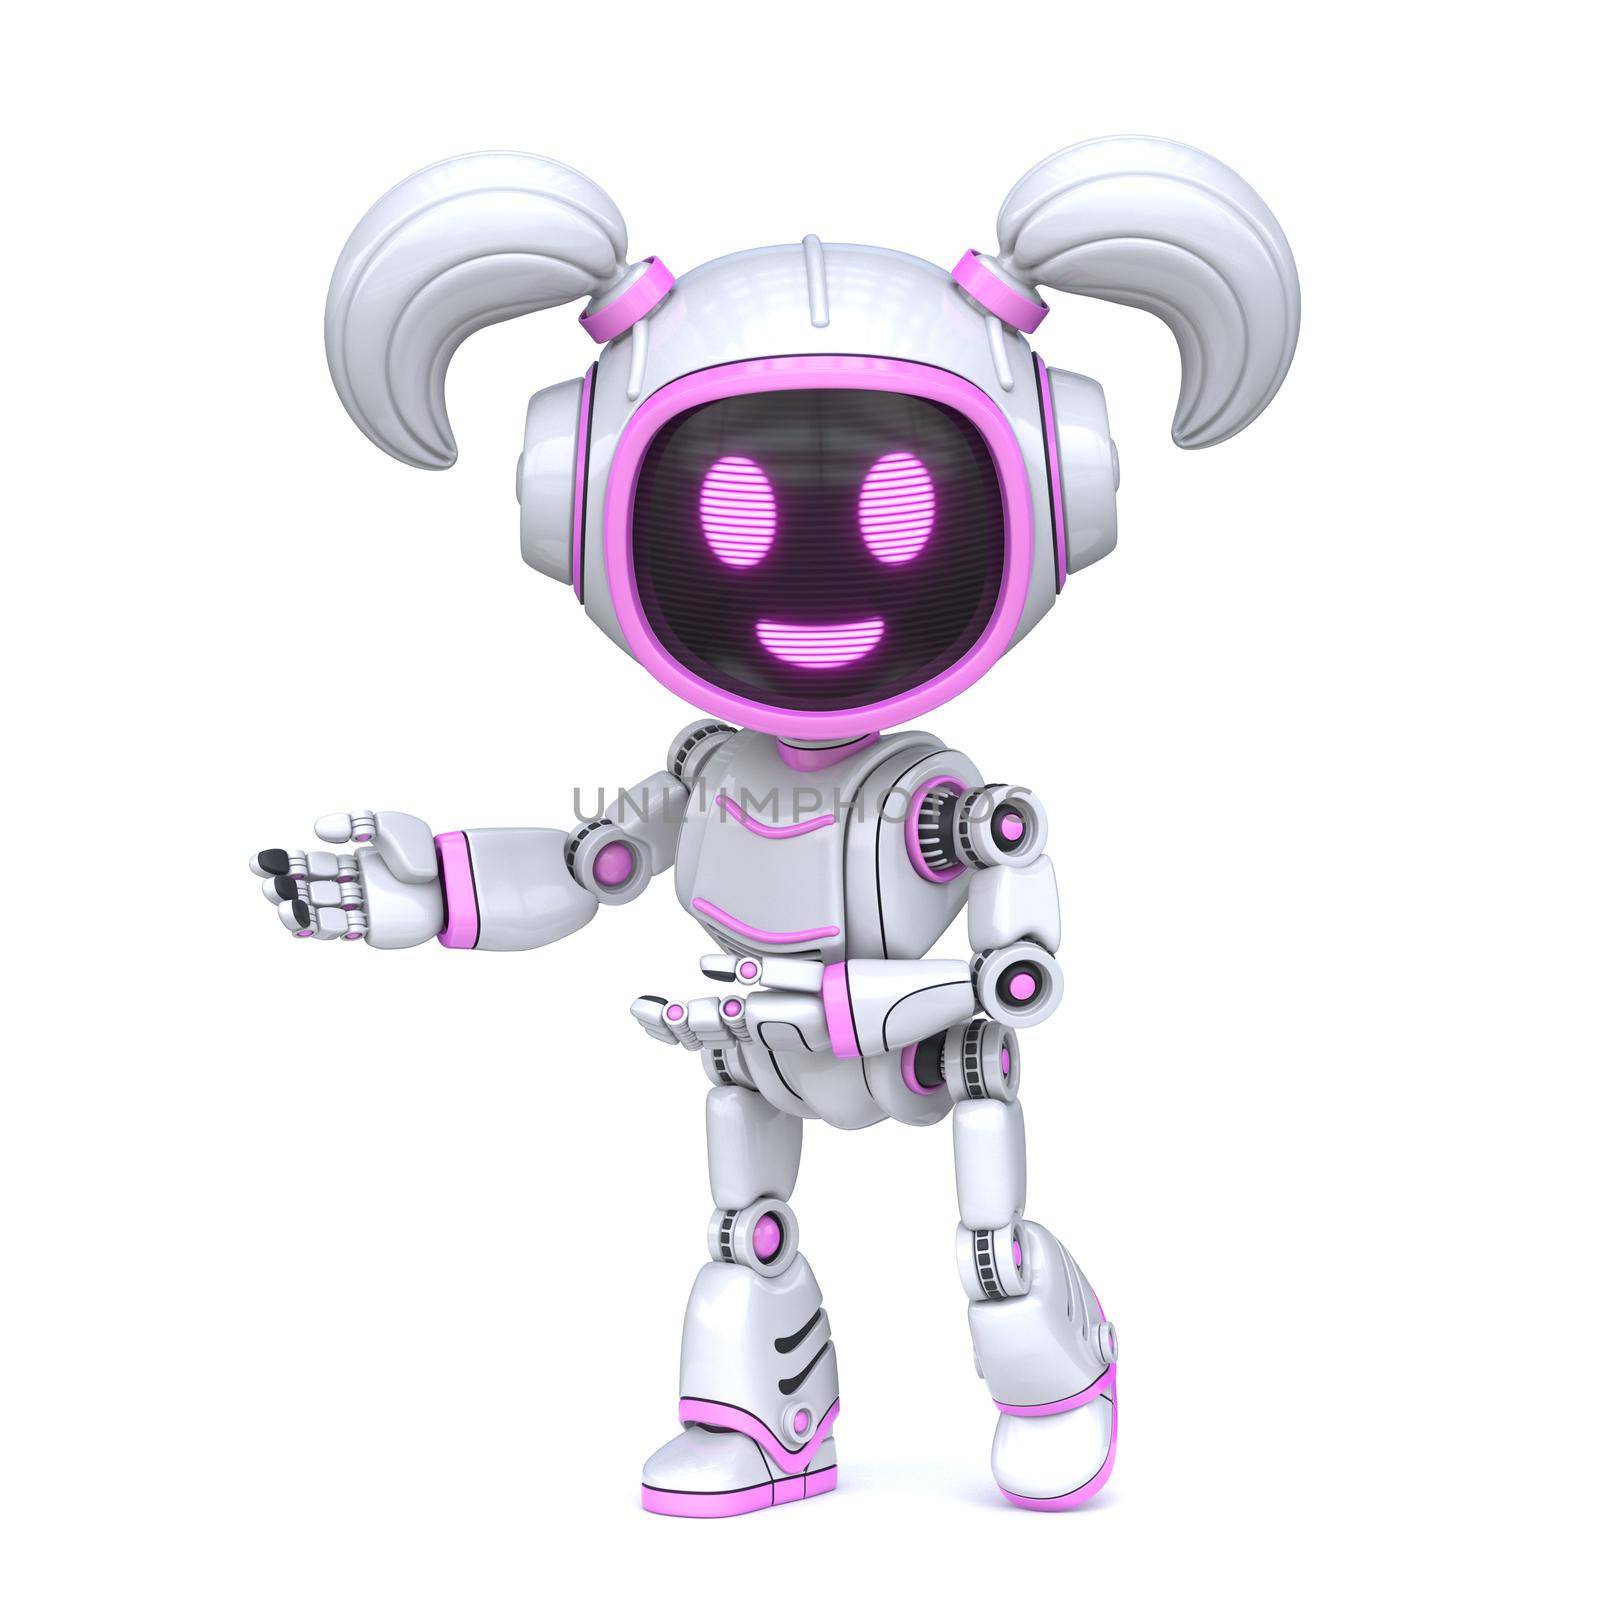 Cute pink girl robot welcoming gesture 3D rendering illustration isolated on white background